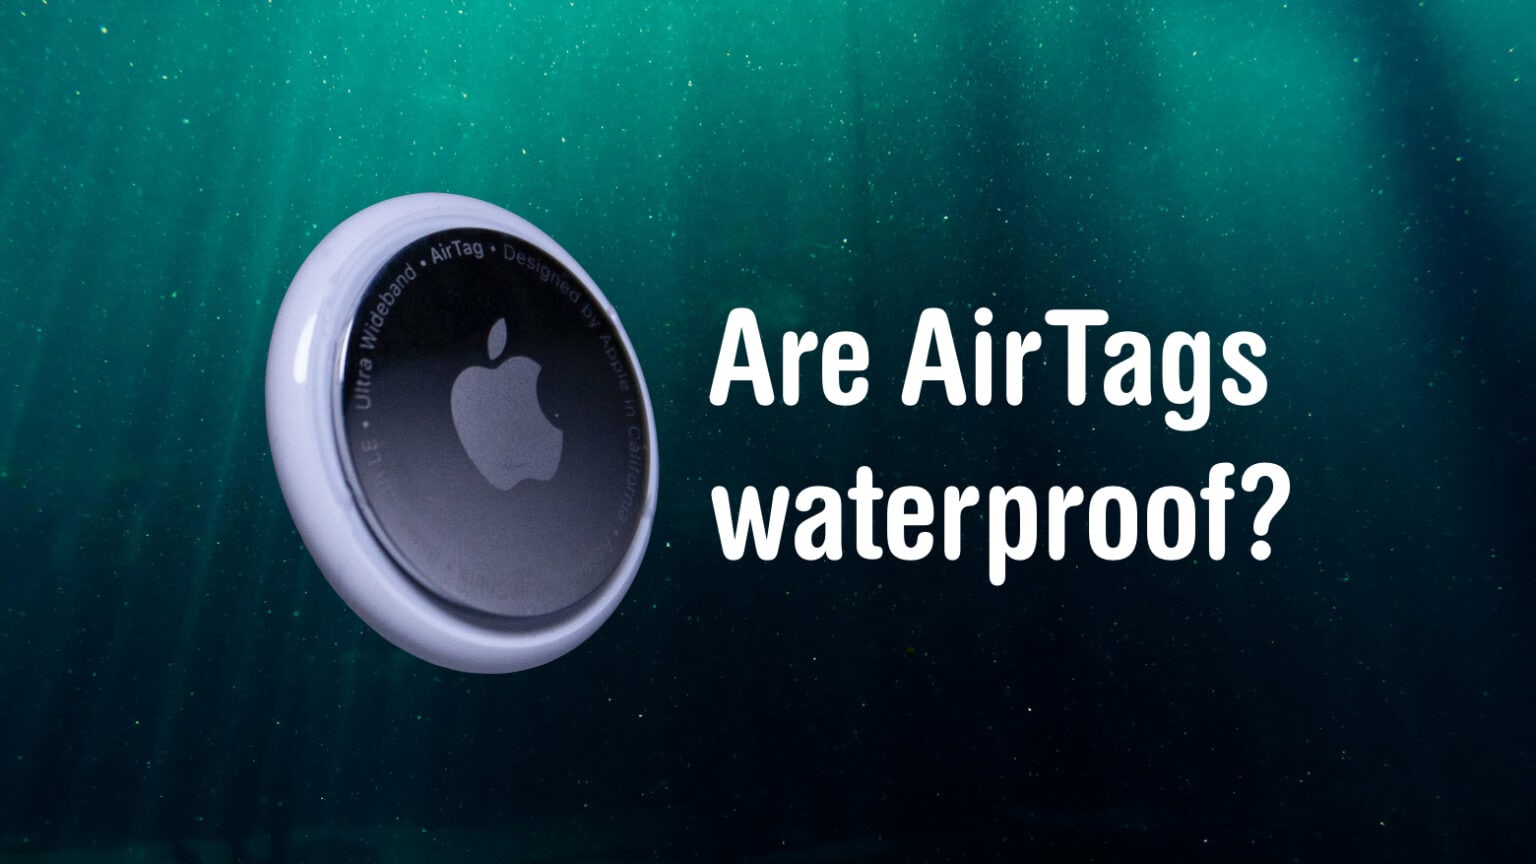 Are AirTags waterproof?